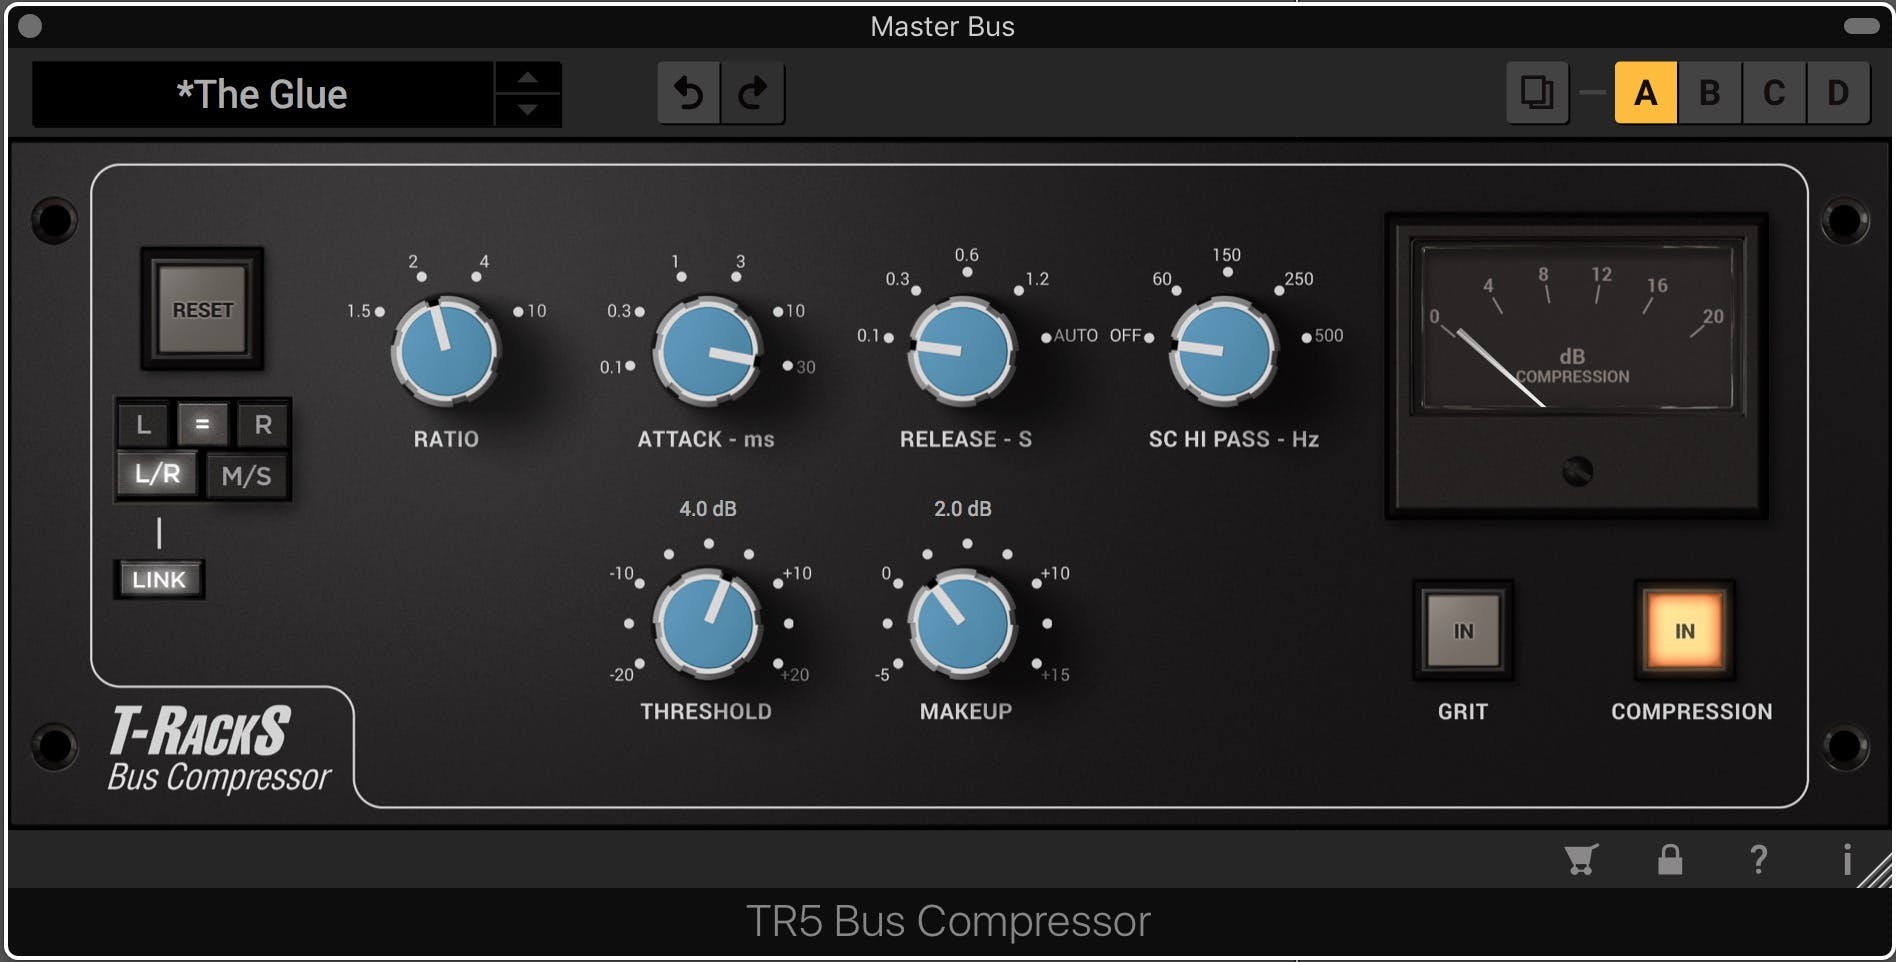 The T-Racks Bus Compressor from IK Multimedia, set with a slow attack and quick release for gentle master bus compression.